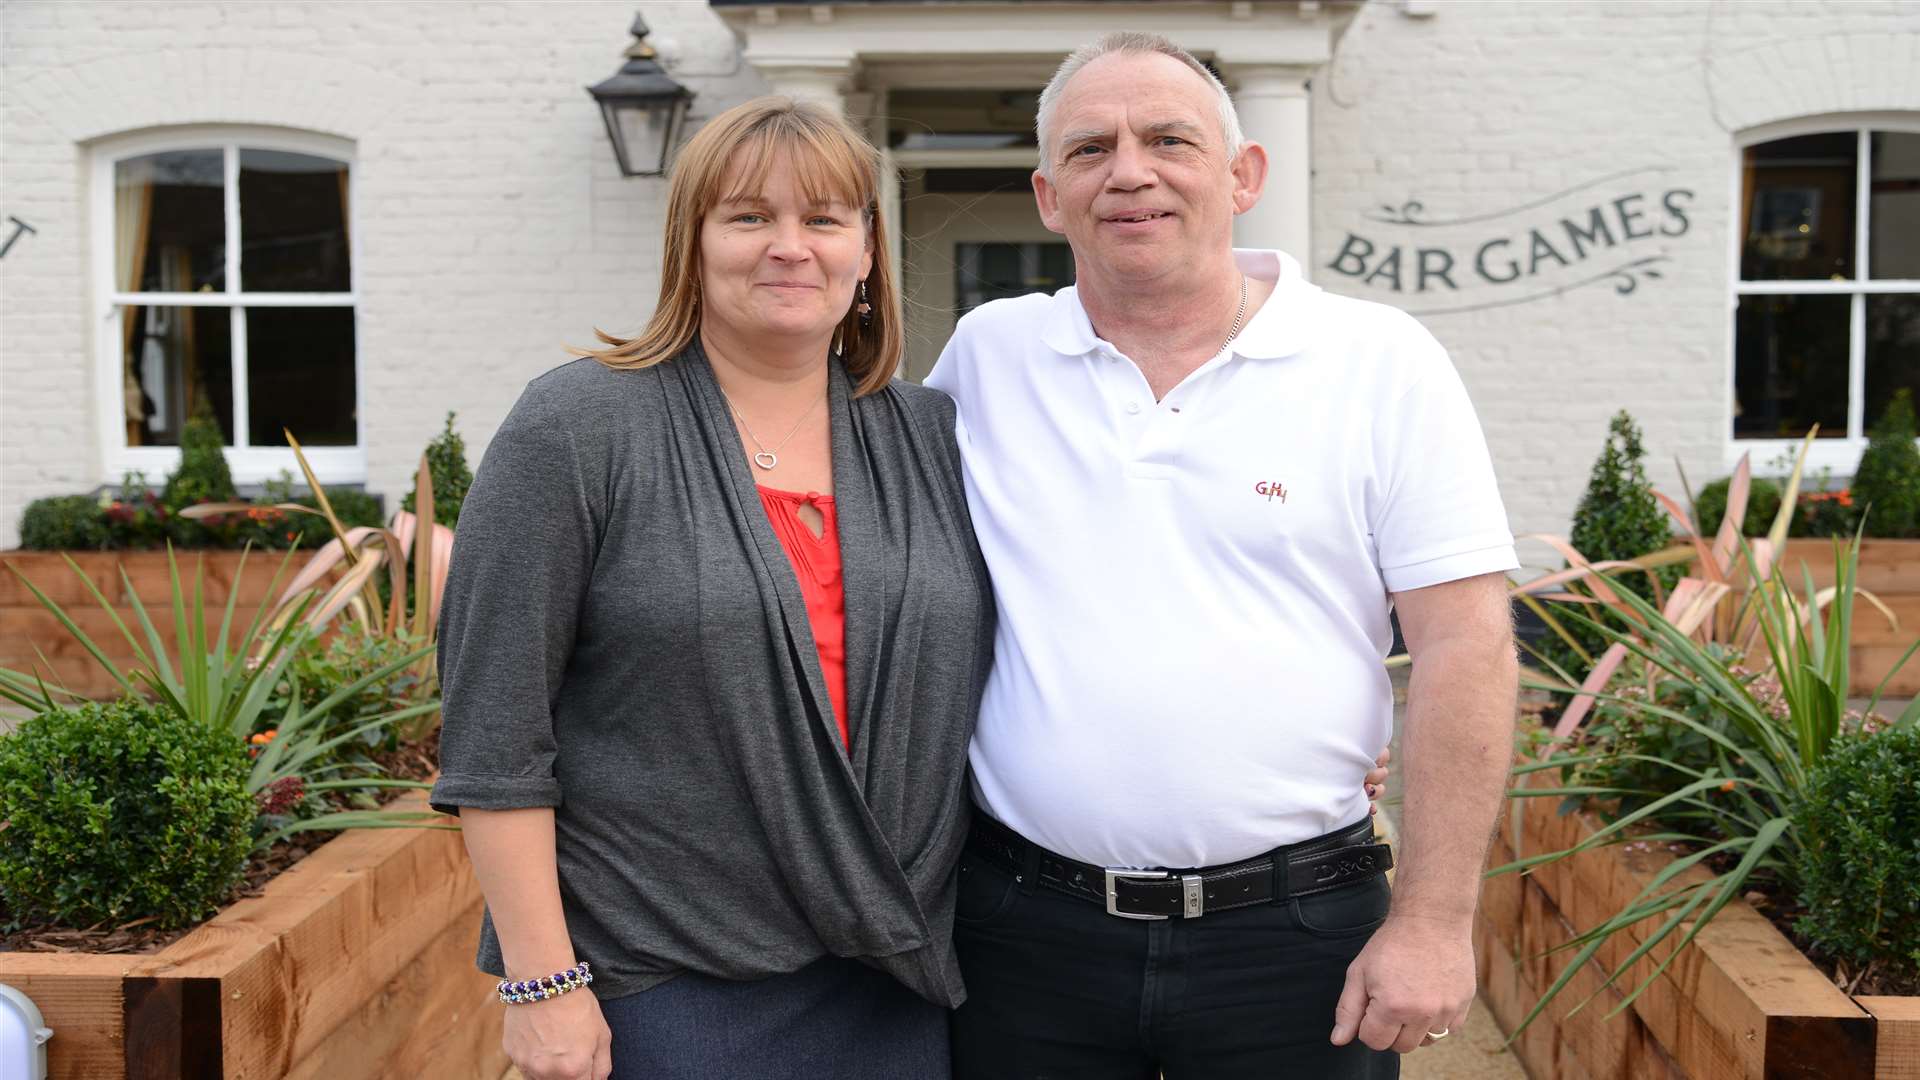 Licensees Sara and Dave Jones and their customers helped the victim and called an ambulance